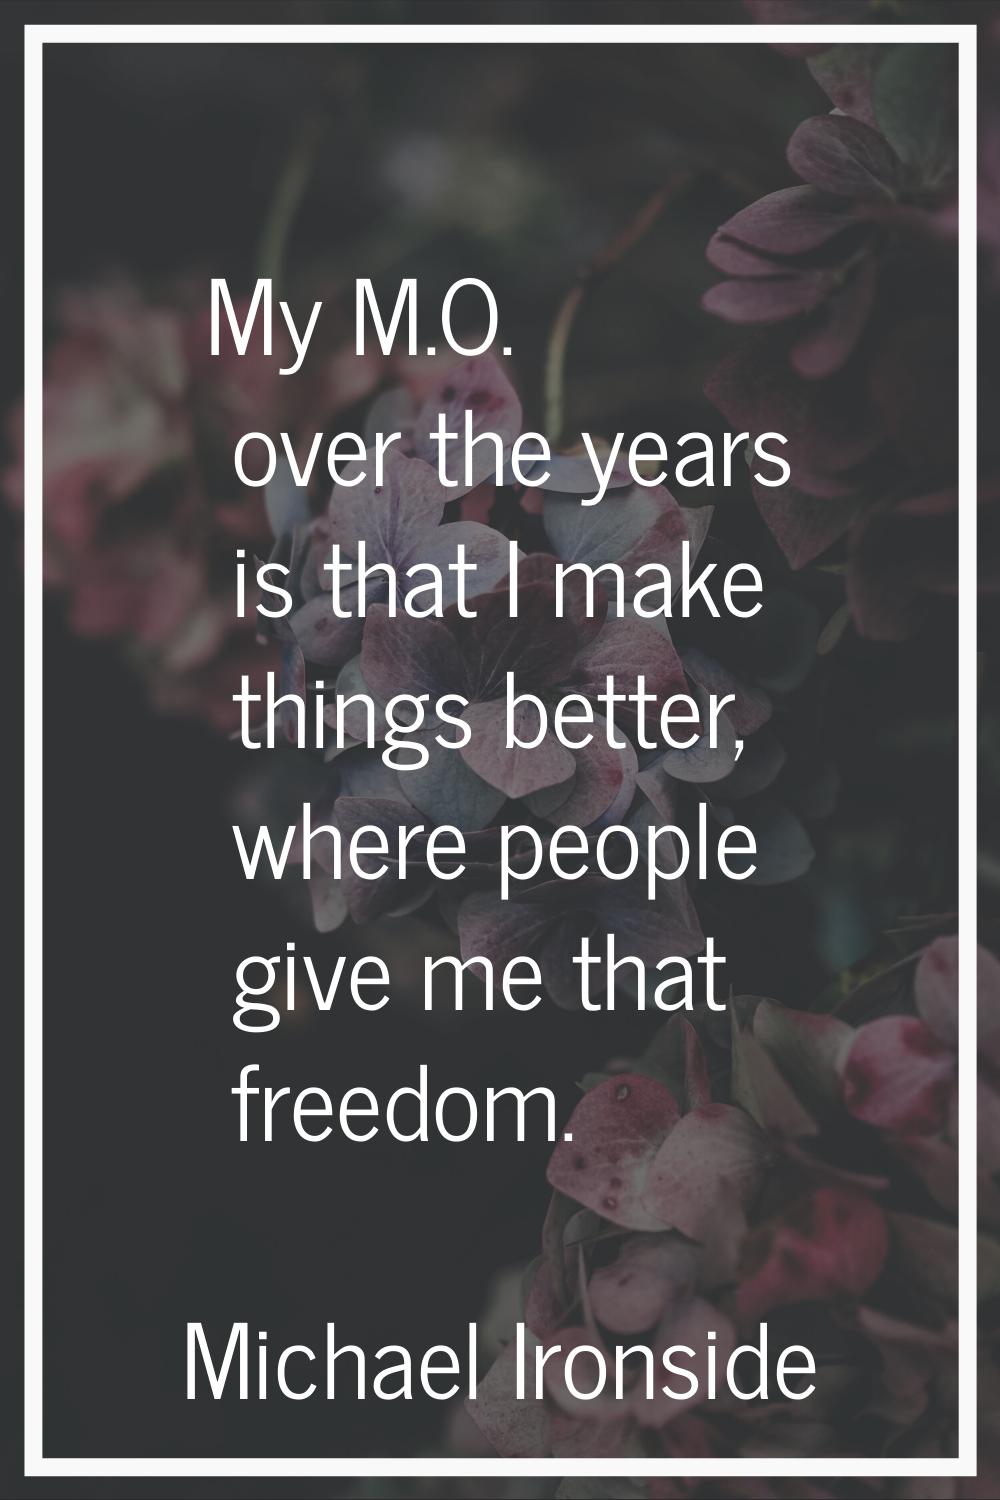 My M.O. over the years is that I make things better, where people give me that freedom.